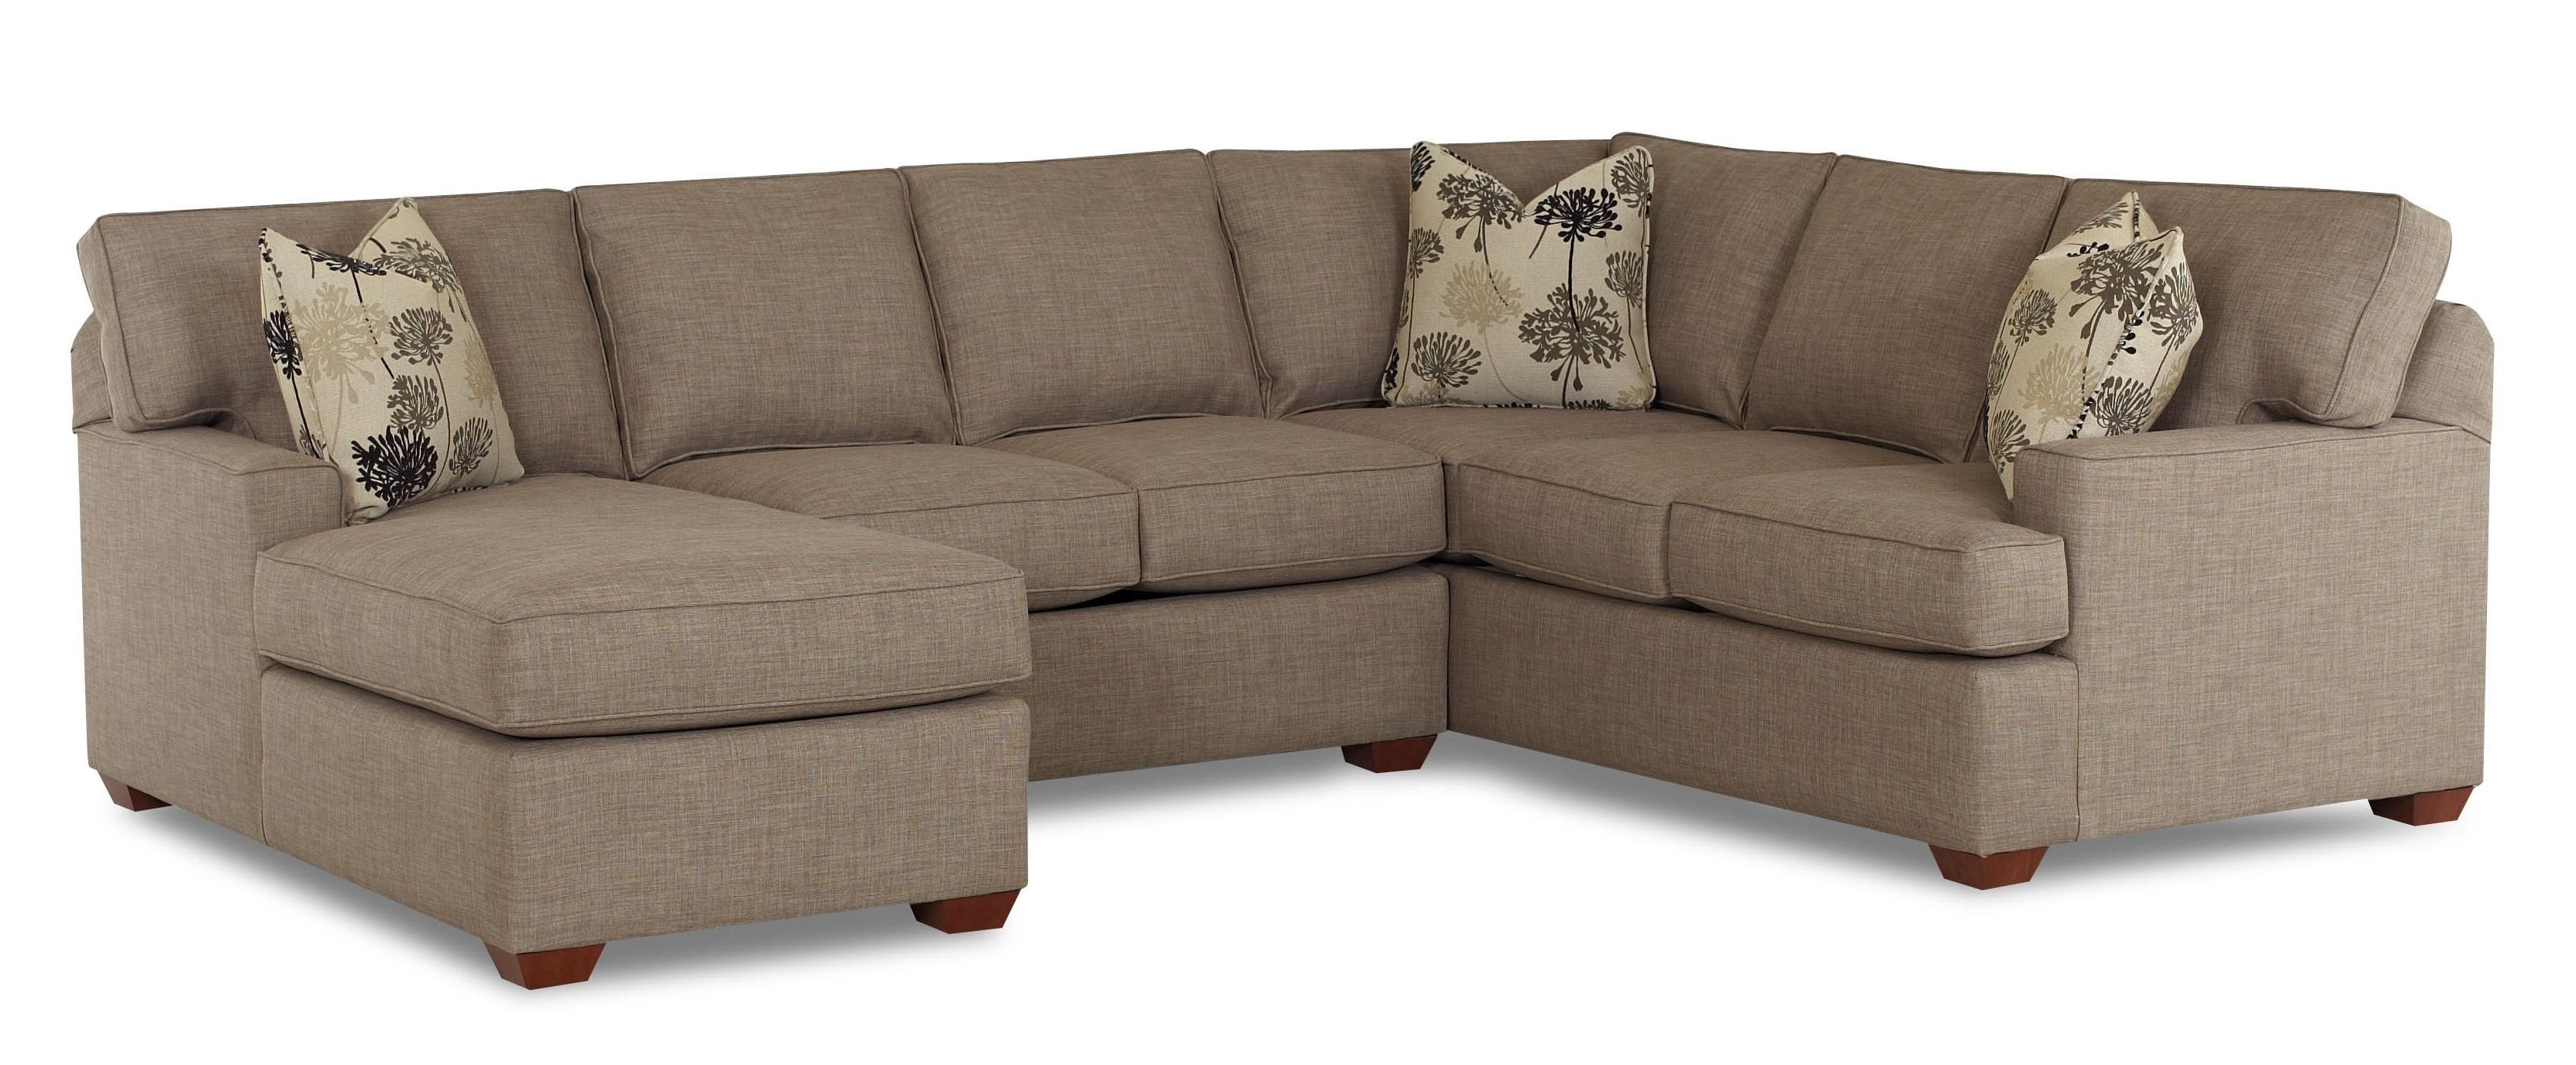 Pantego 3 Piece Sectional Sofa With Raf Chaiseklaussner | Home Inside Johnny Janosik Sectional Sofas (Photo 8 of 10)